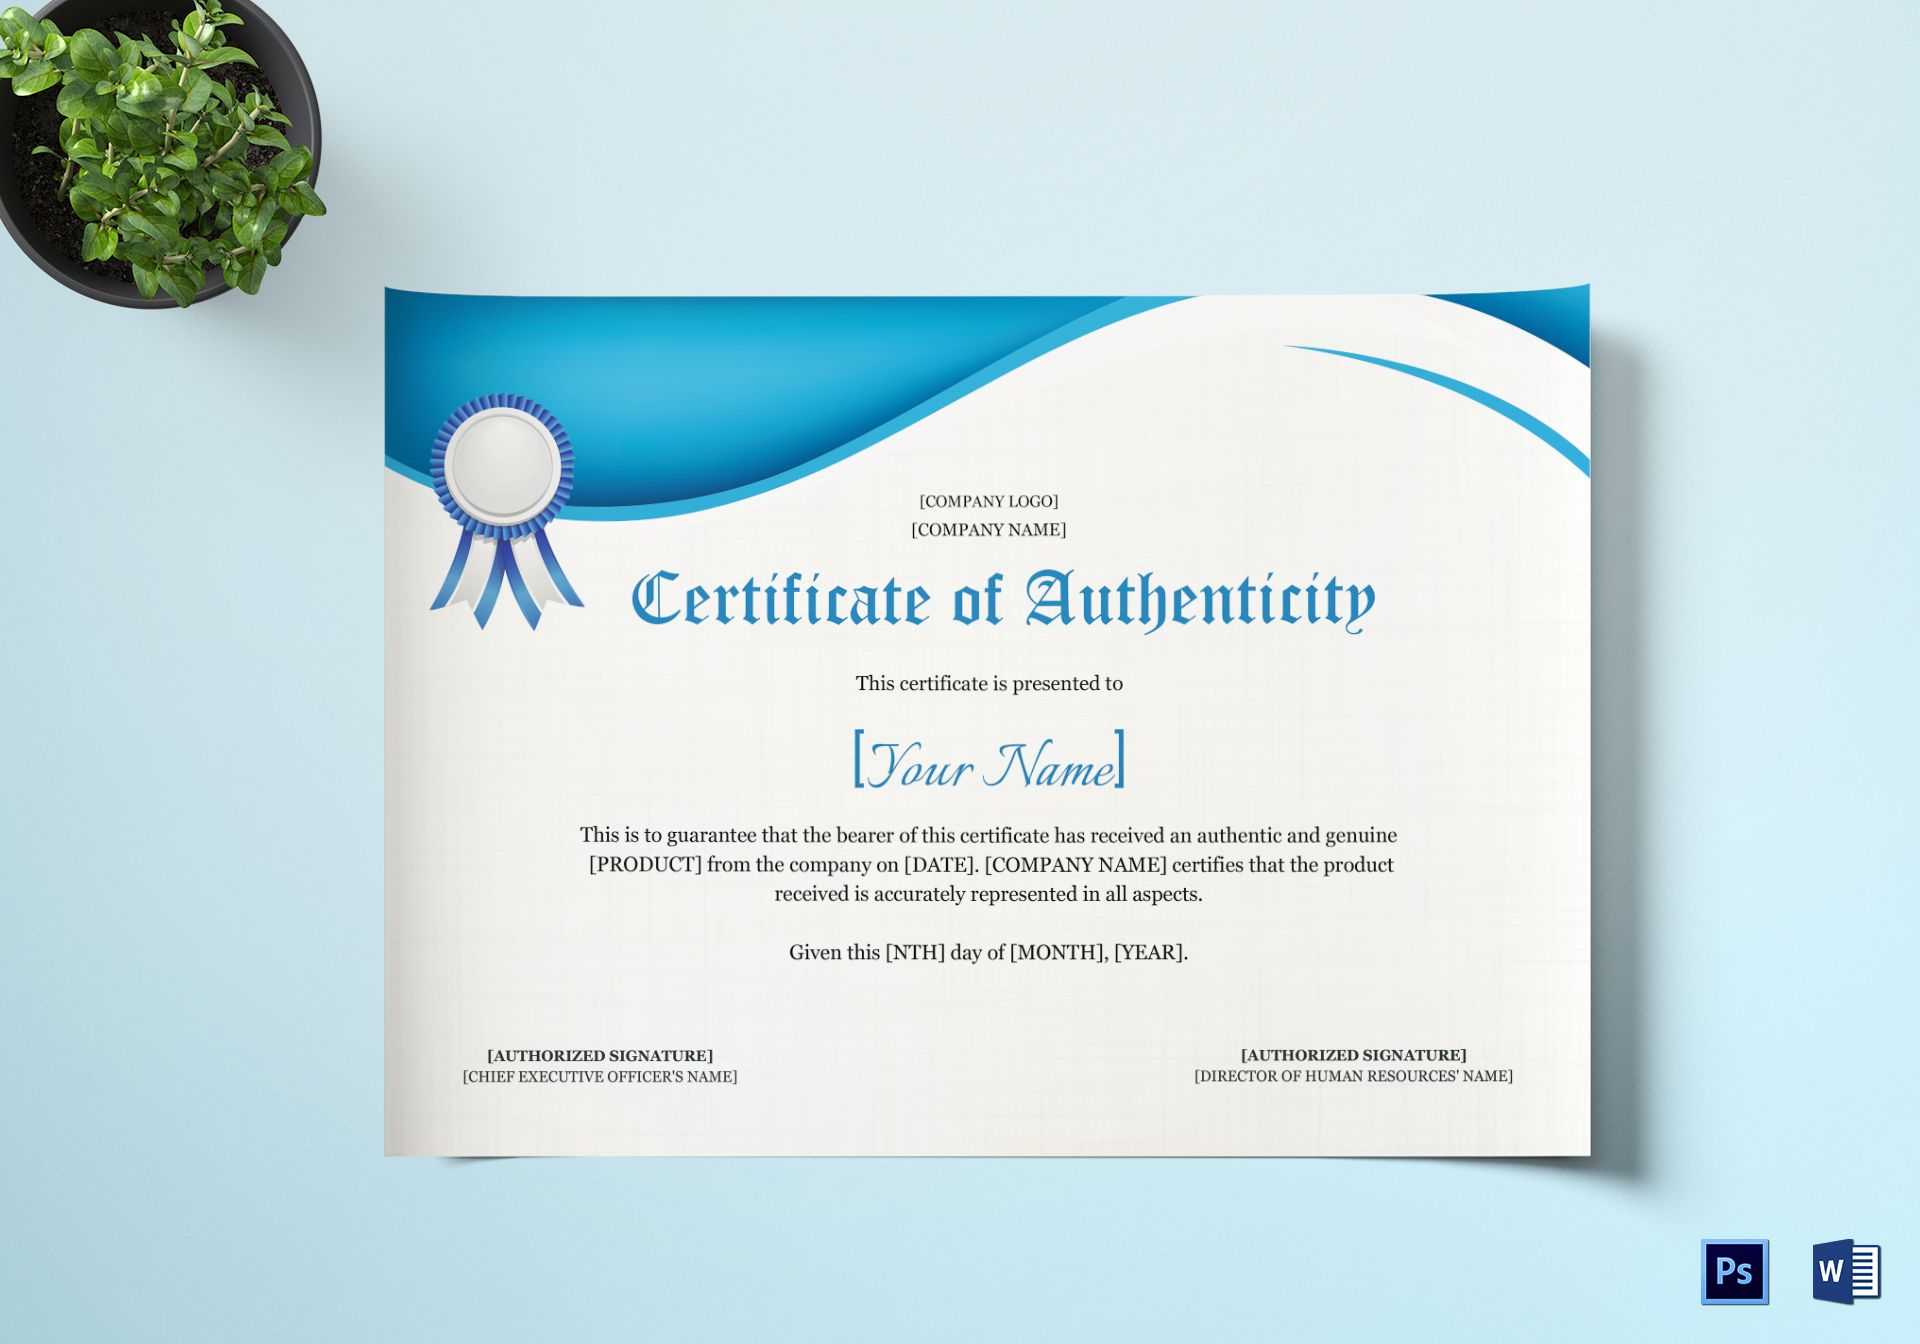 Product Authenticity Certificate Template In Certificate Of Authenticity Template